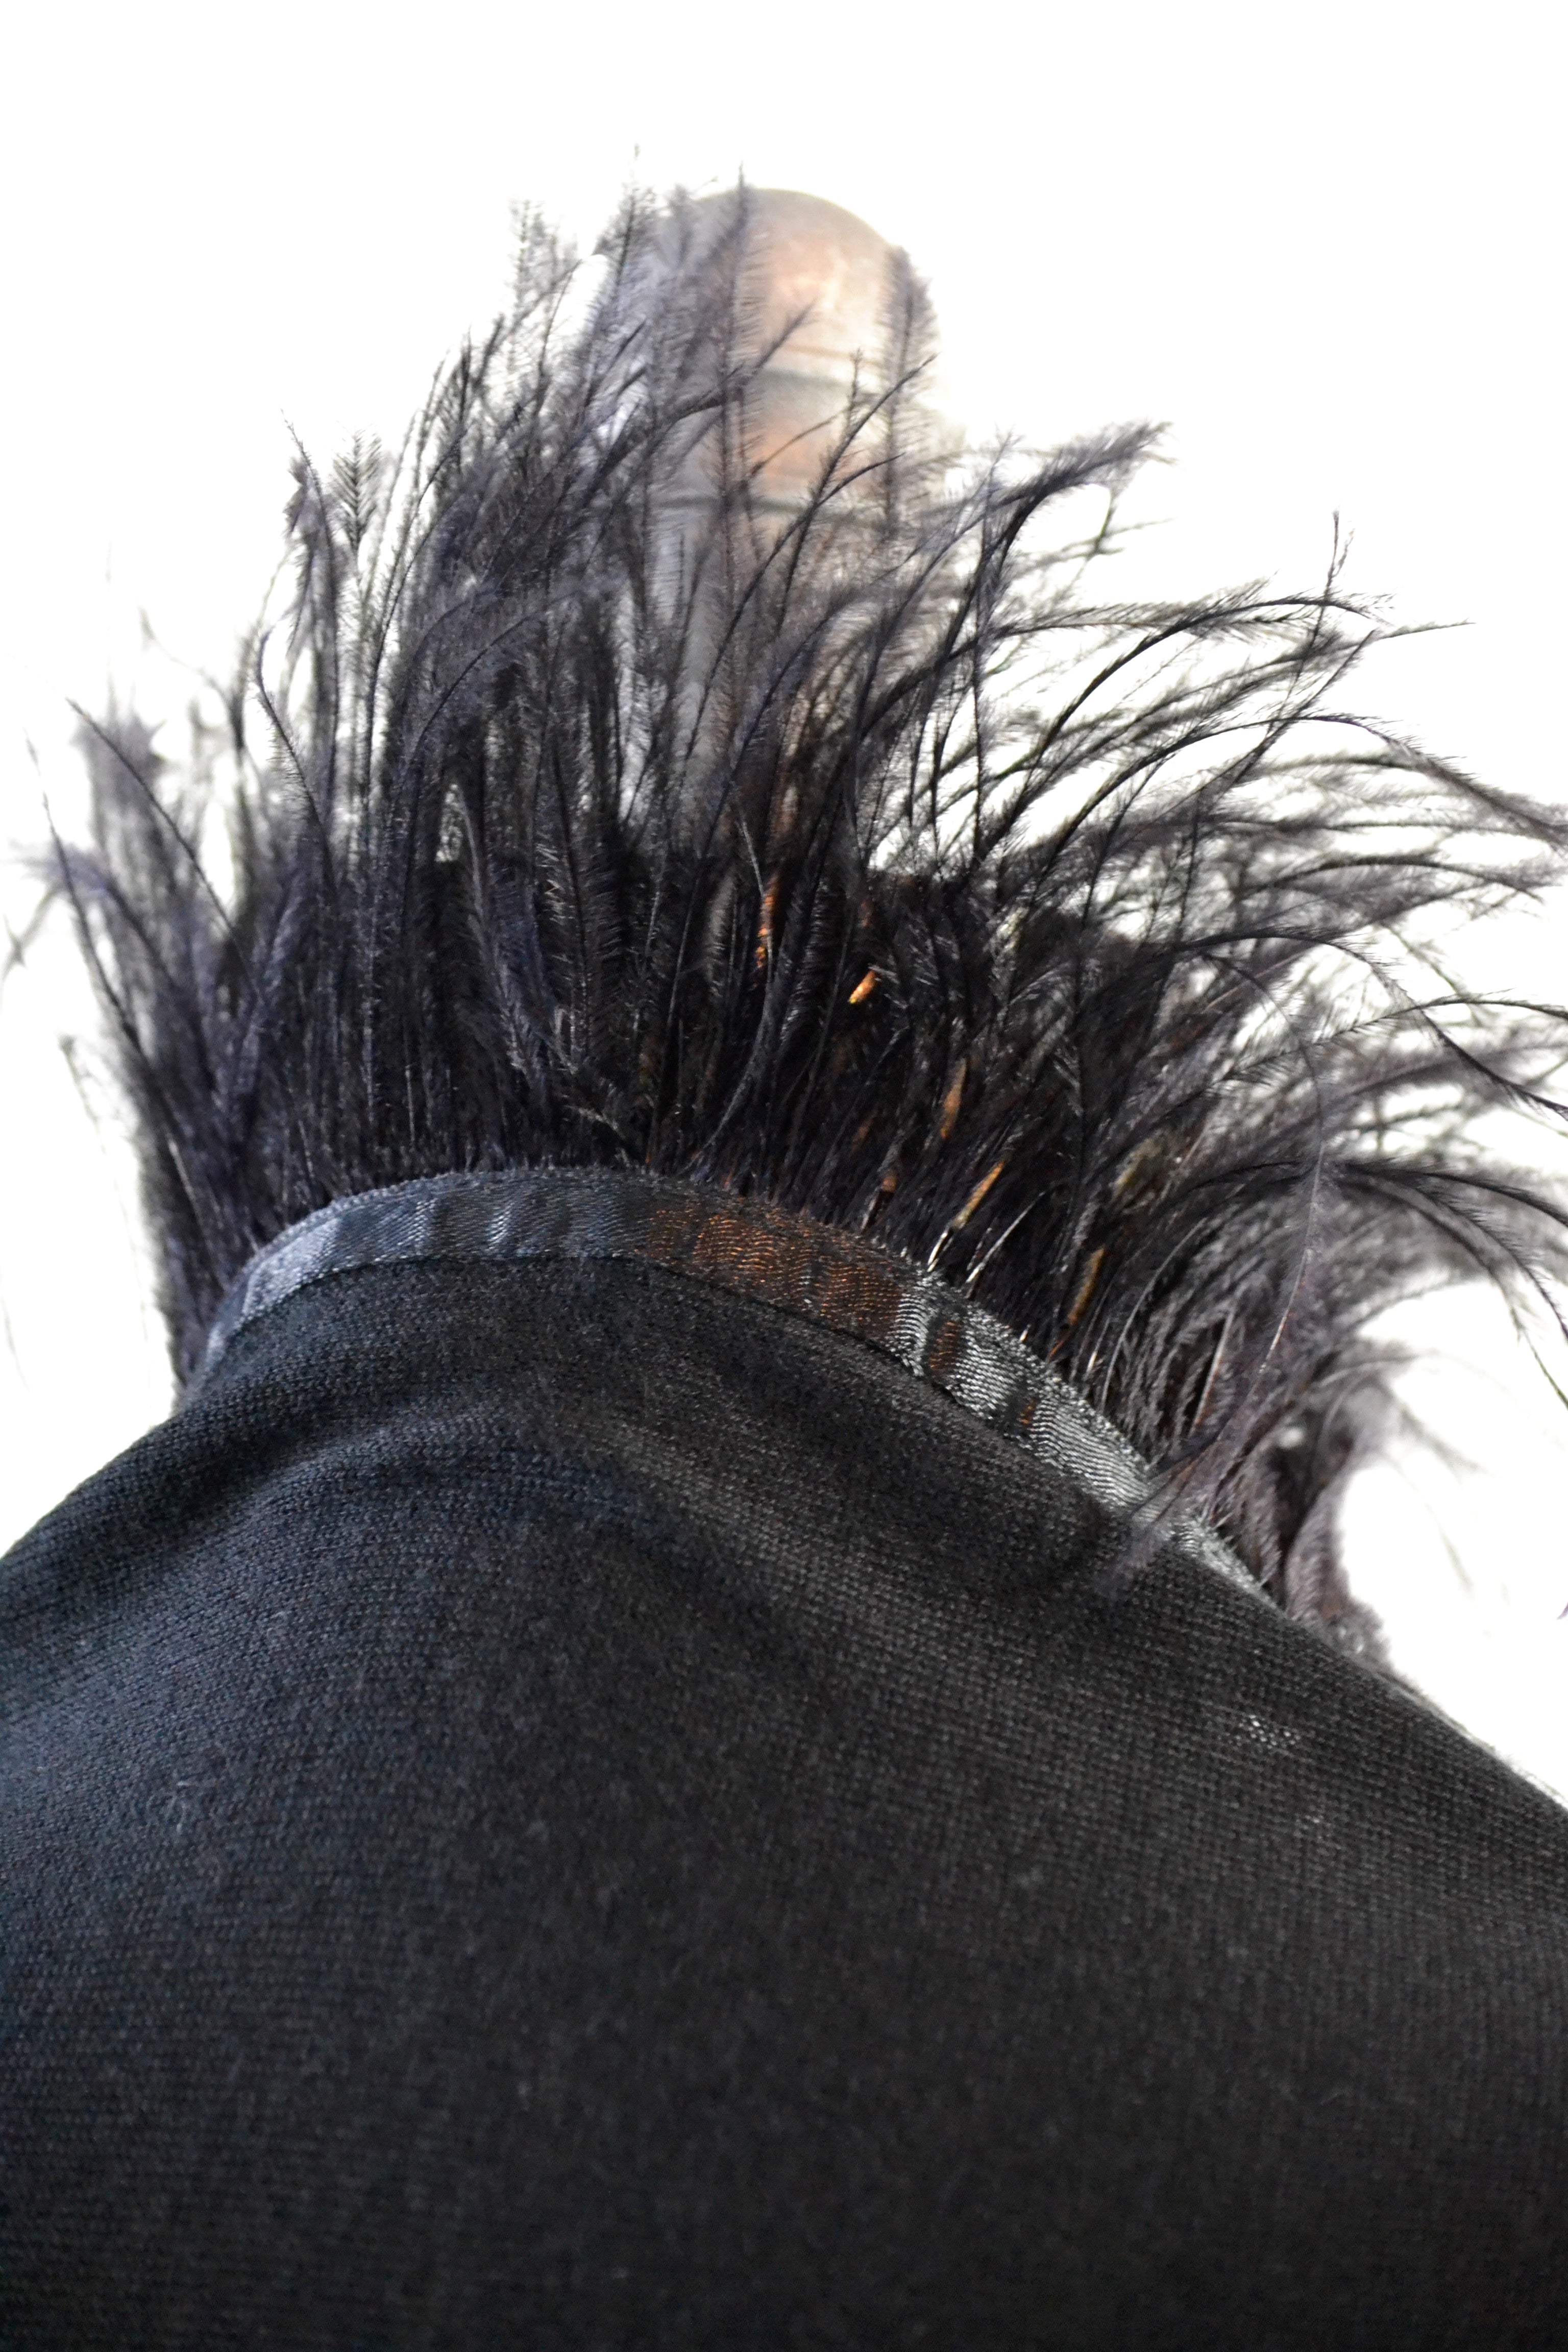 Fine Cashmere Wrap with Long Ostrich Feathers in Black